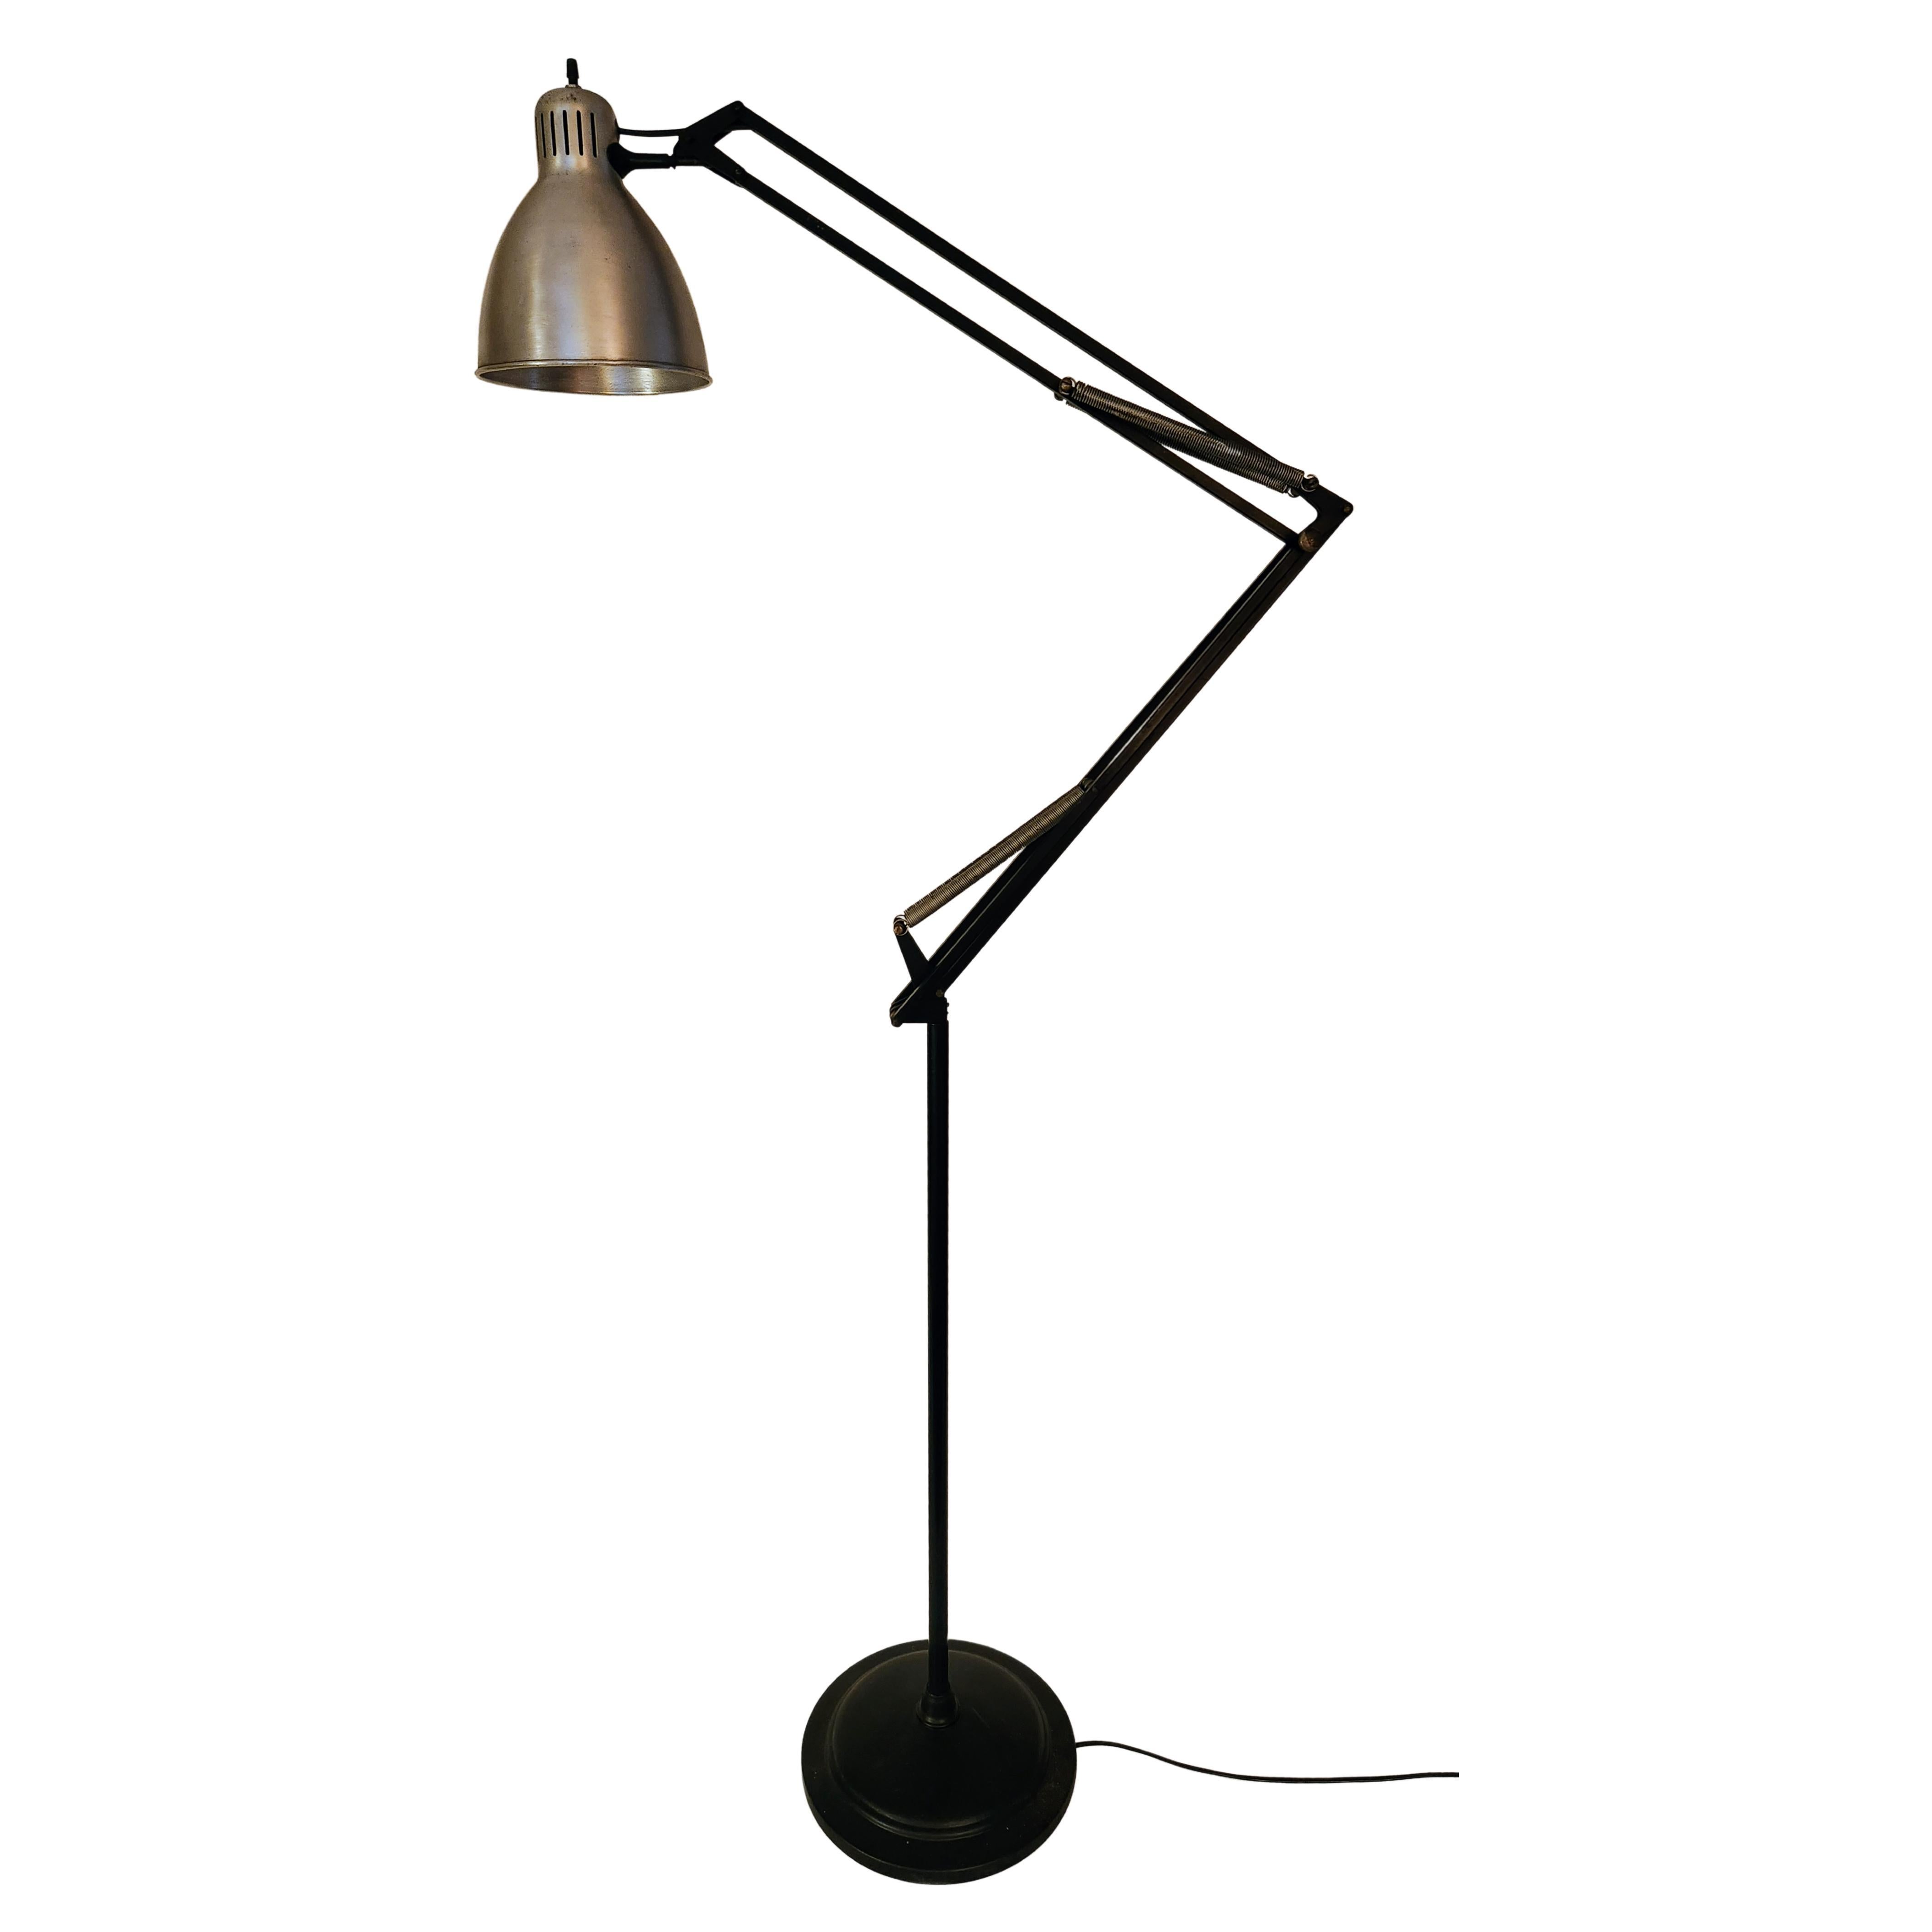 Luxo L 1 Lamp - For Sale on 1stDibs